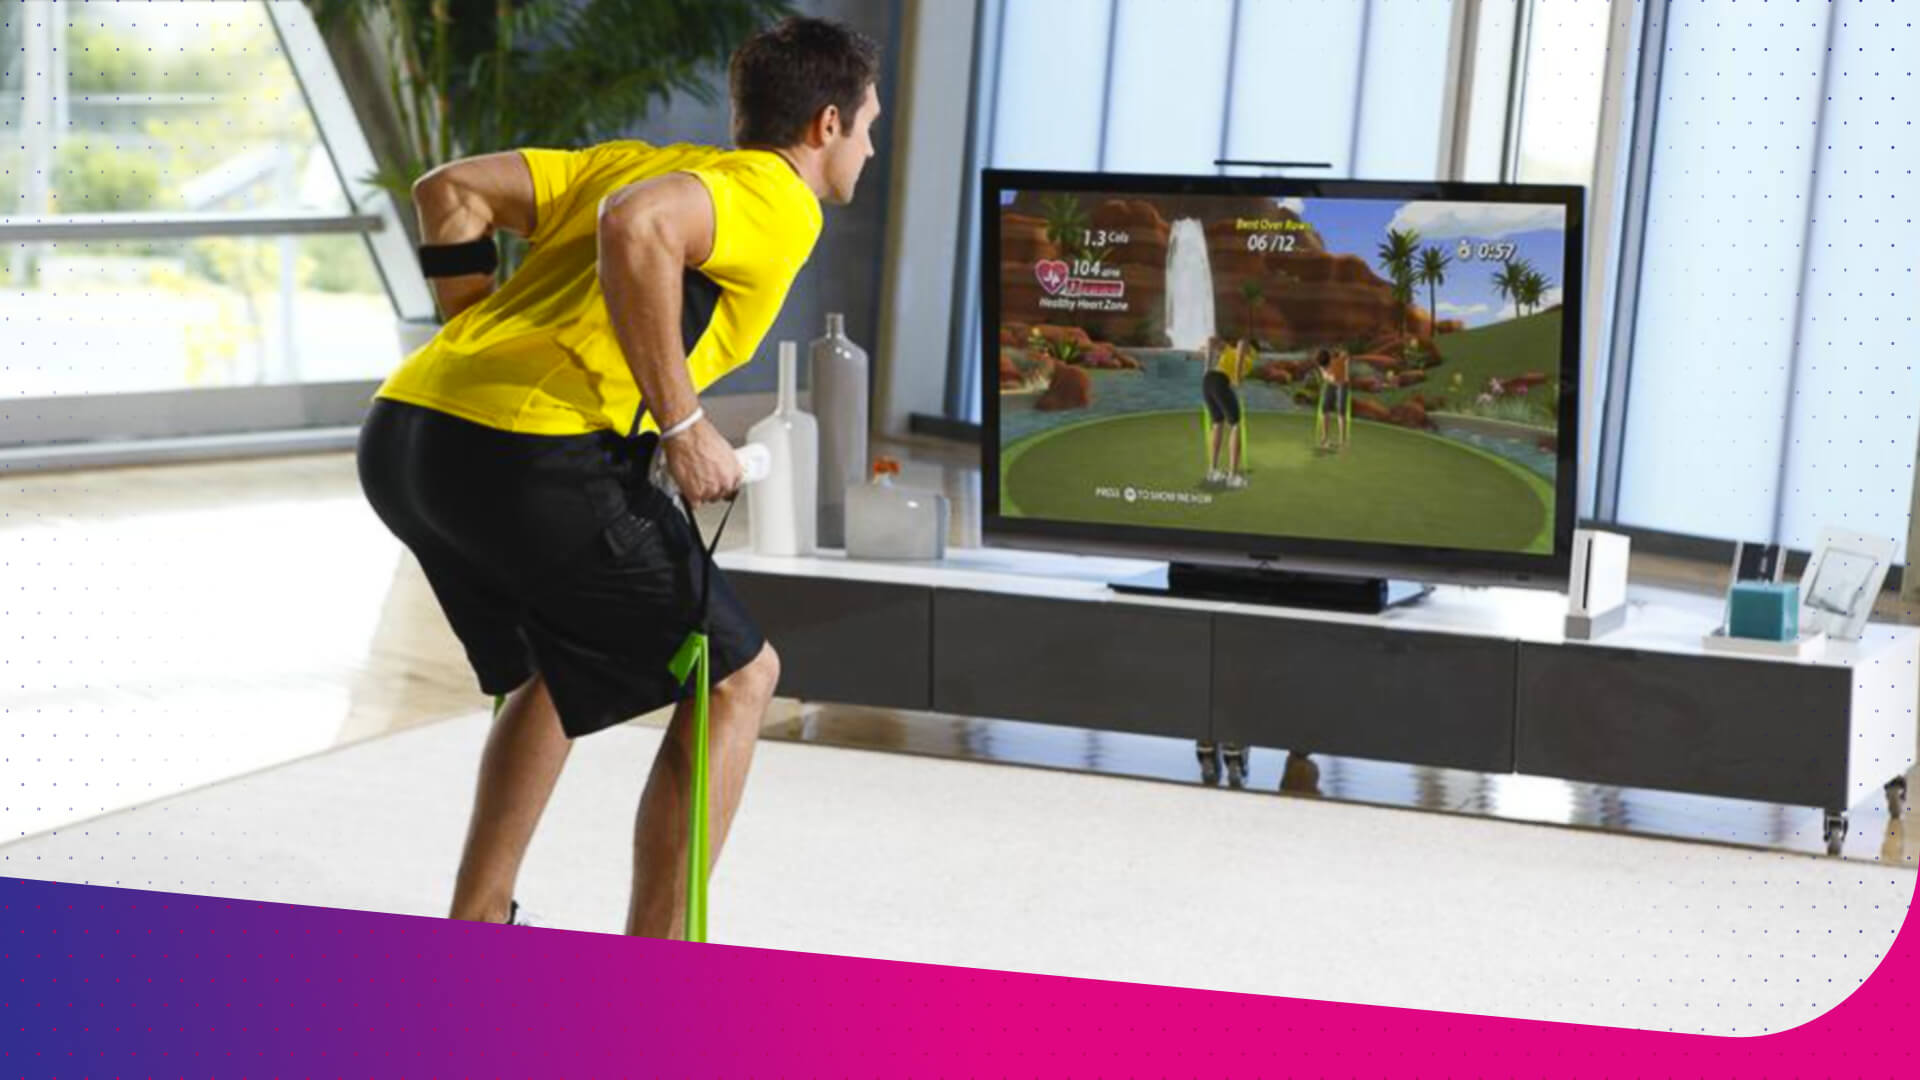 Reimagining Fitness: Exploring the Unexpected Physical Benefits of Videogames